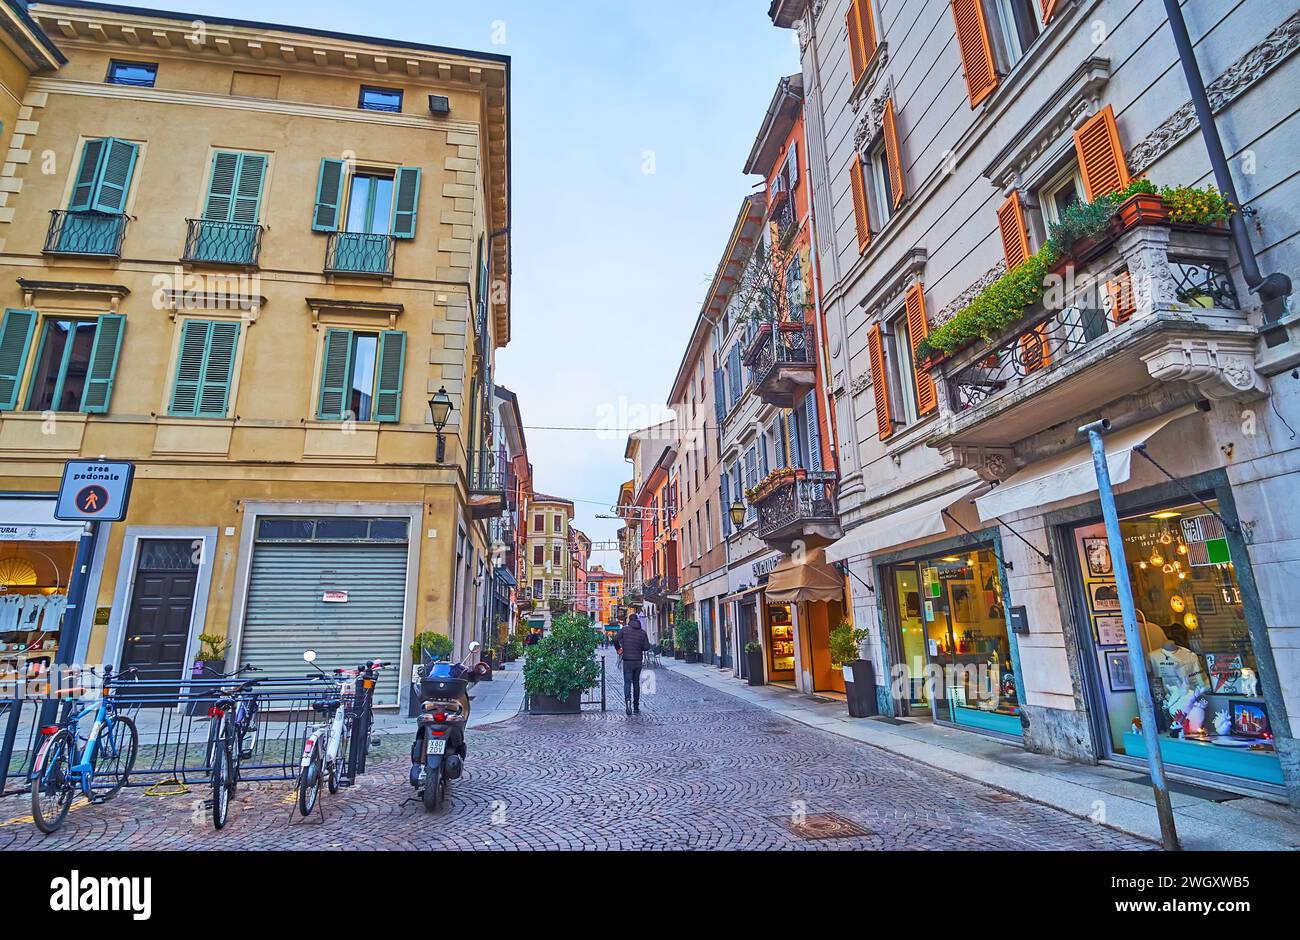 CREMONA, ITALY - APRIL 6, 2022: Via Mercatello with old houses, shops, cafes and small hotels, Cremona,  Italy Stock Photo